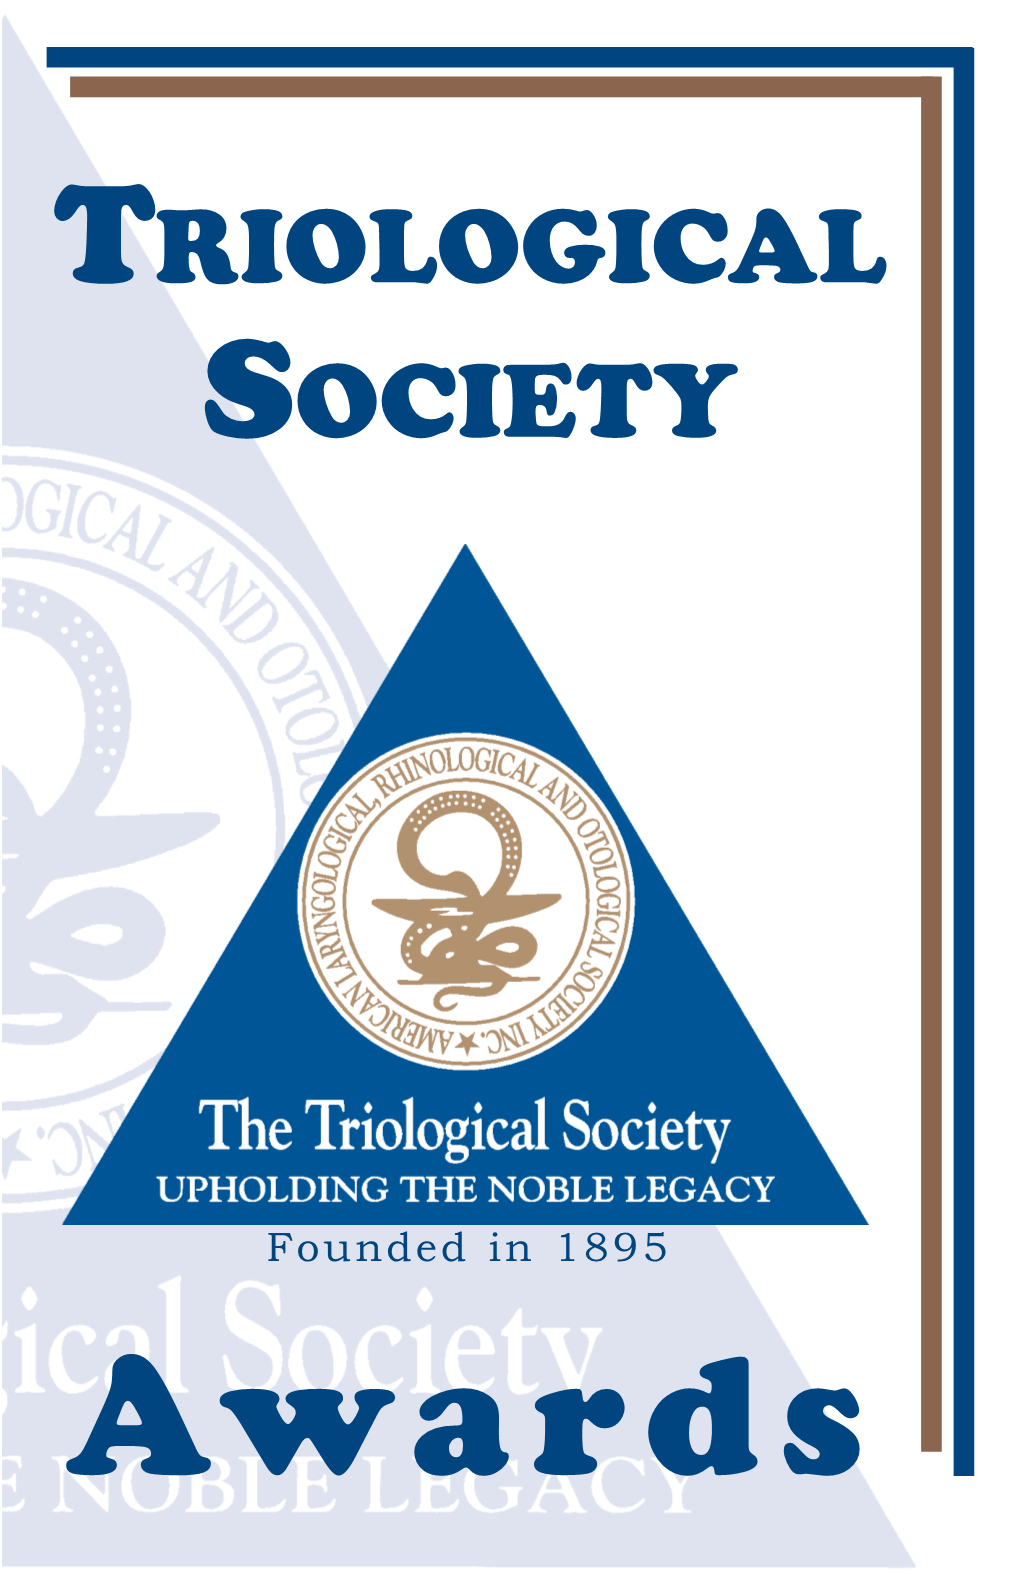 The Triological Society, I Hope You Enjoy the Short Biographies Related to Our Section and National Awards in This Booklet